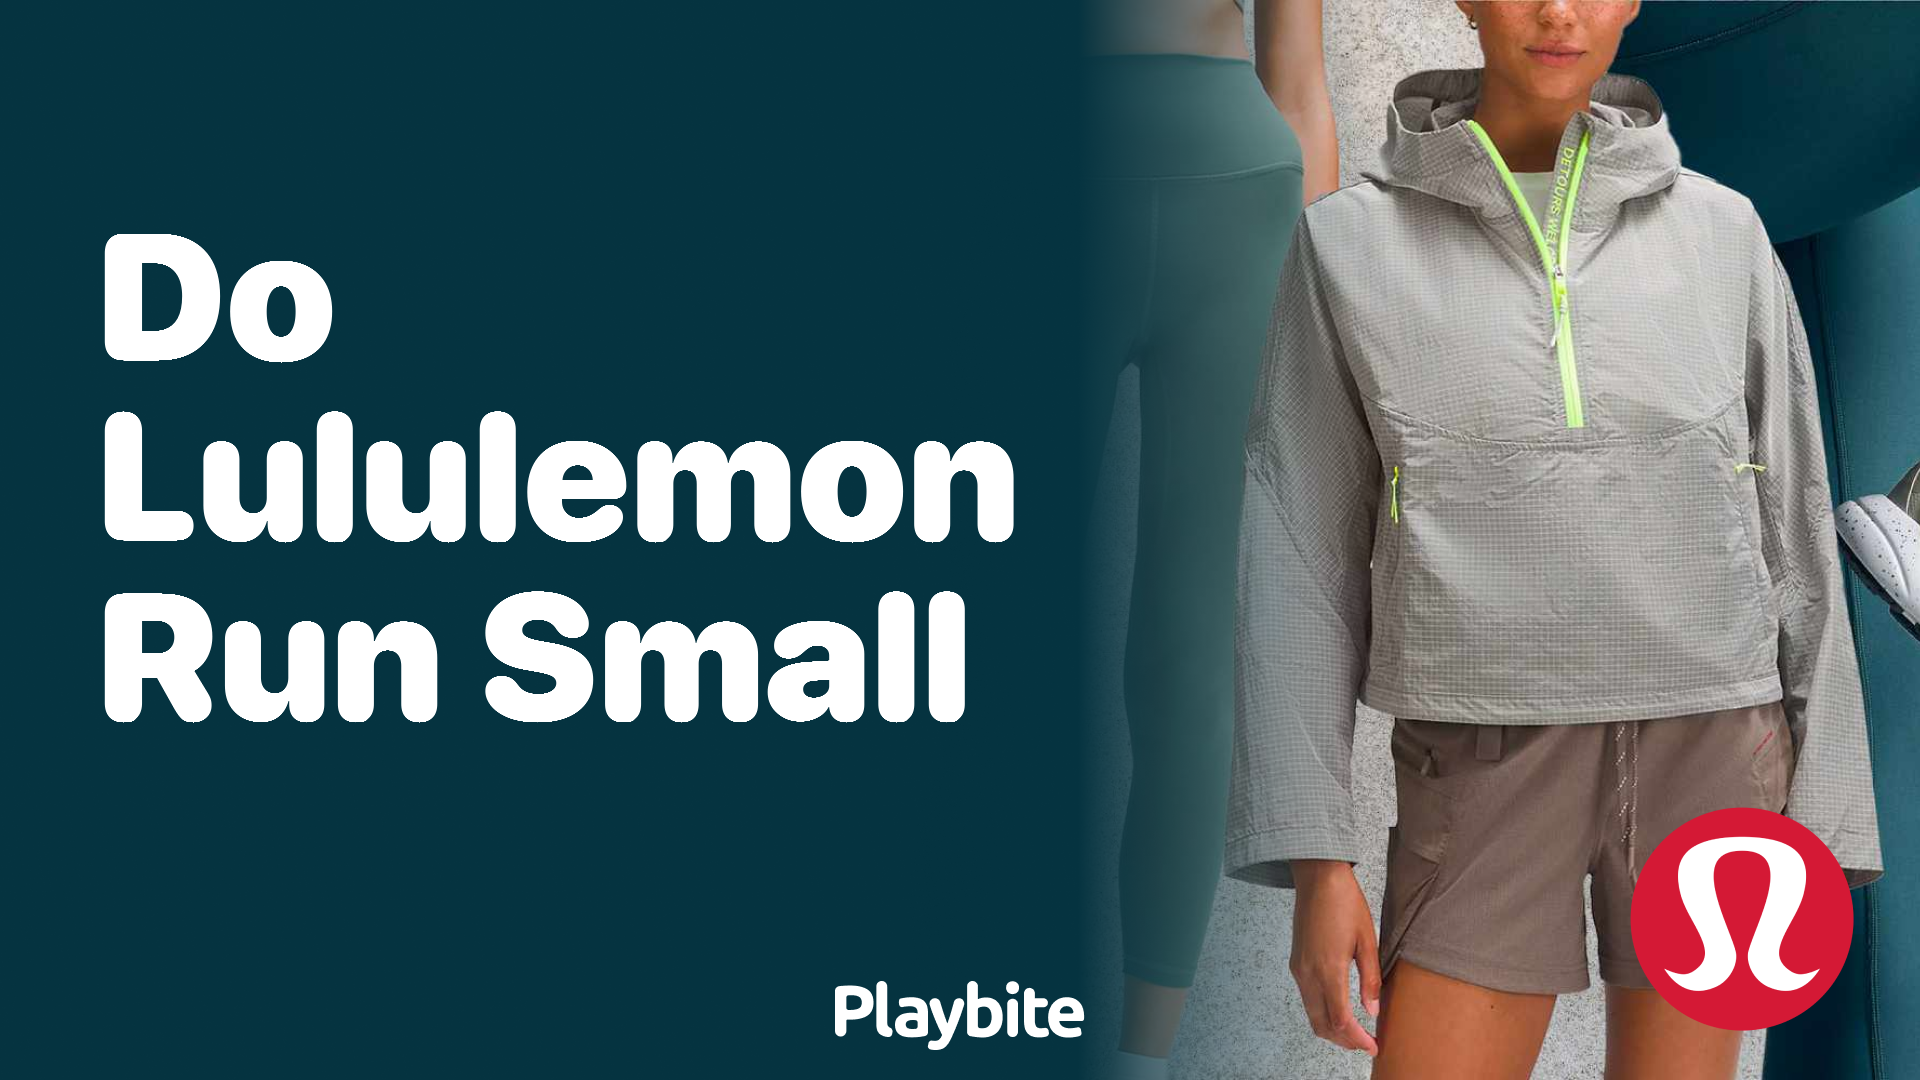 Do Lululemon Clothes Run Small? Let's Find Out! - Playbite